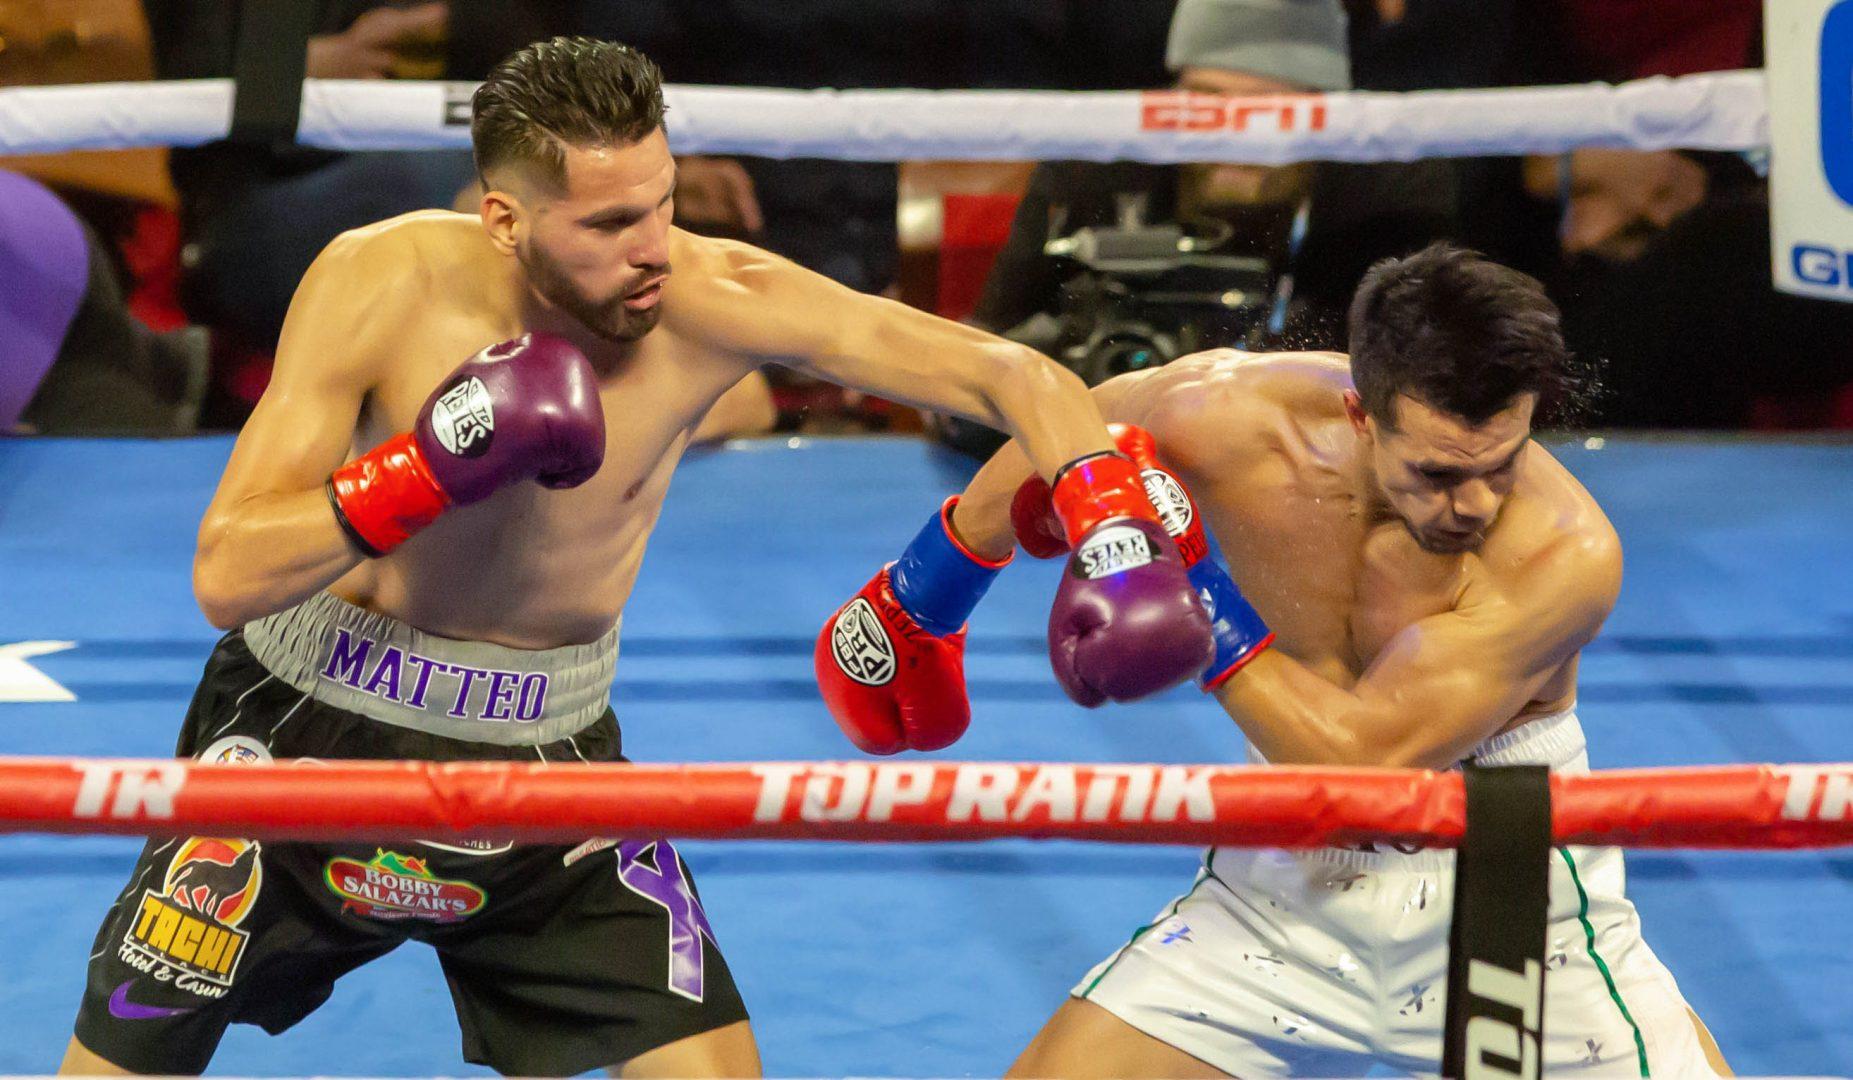 JosÃ© RamÃ­rez, left, connects with a left hook during his WBC super lightweight title
defense against JosÃ© Zepeda at the Save Mart Center on Sunday, Feb. 10, 2019. (Jose Romo
Jr./The Collegian).